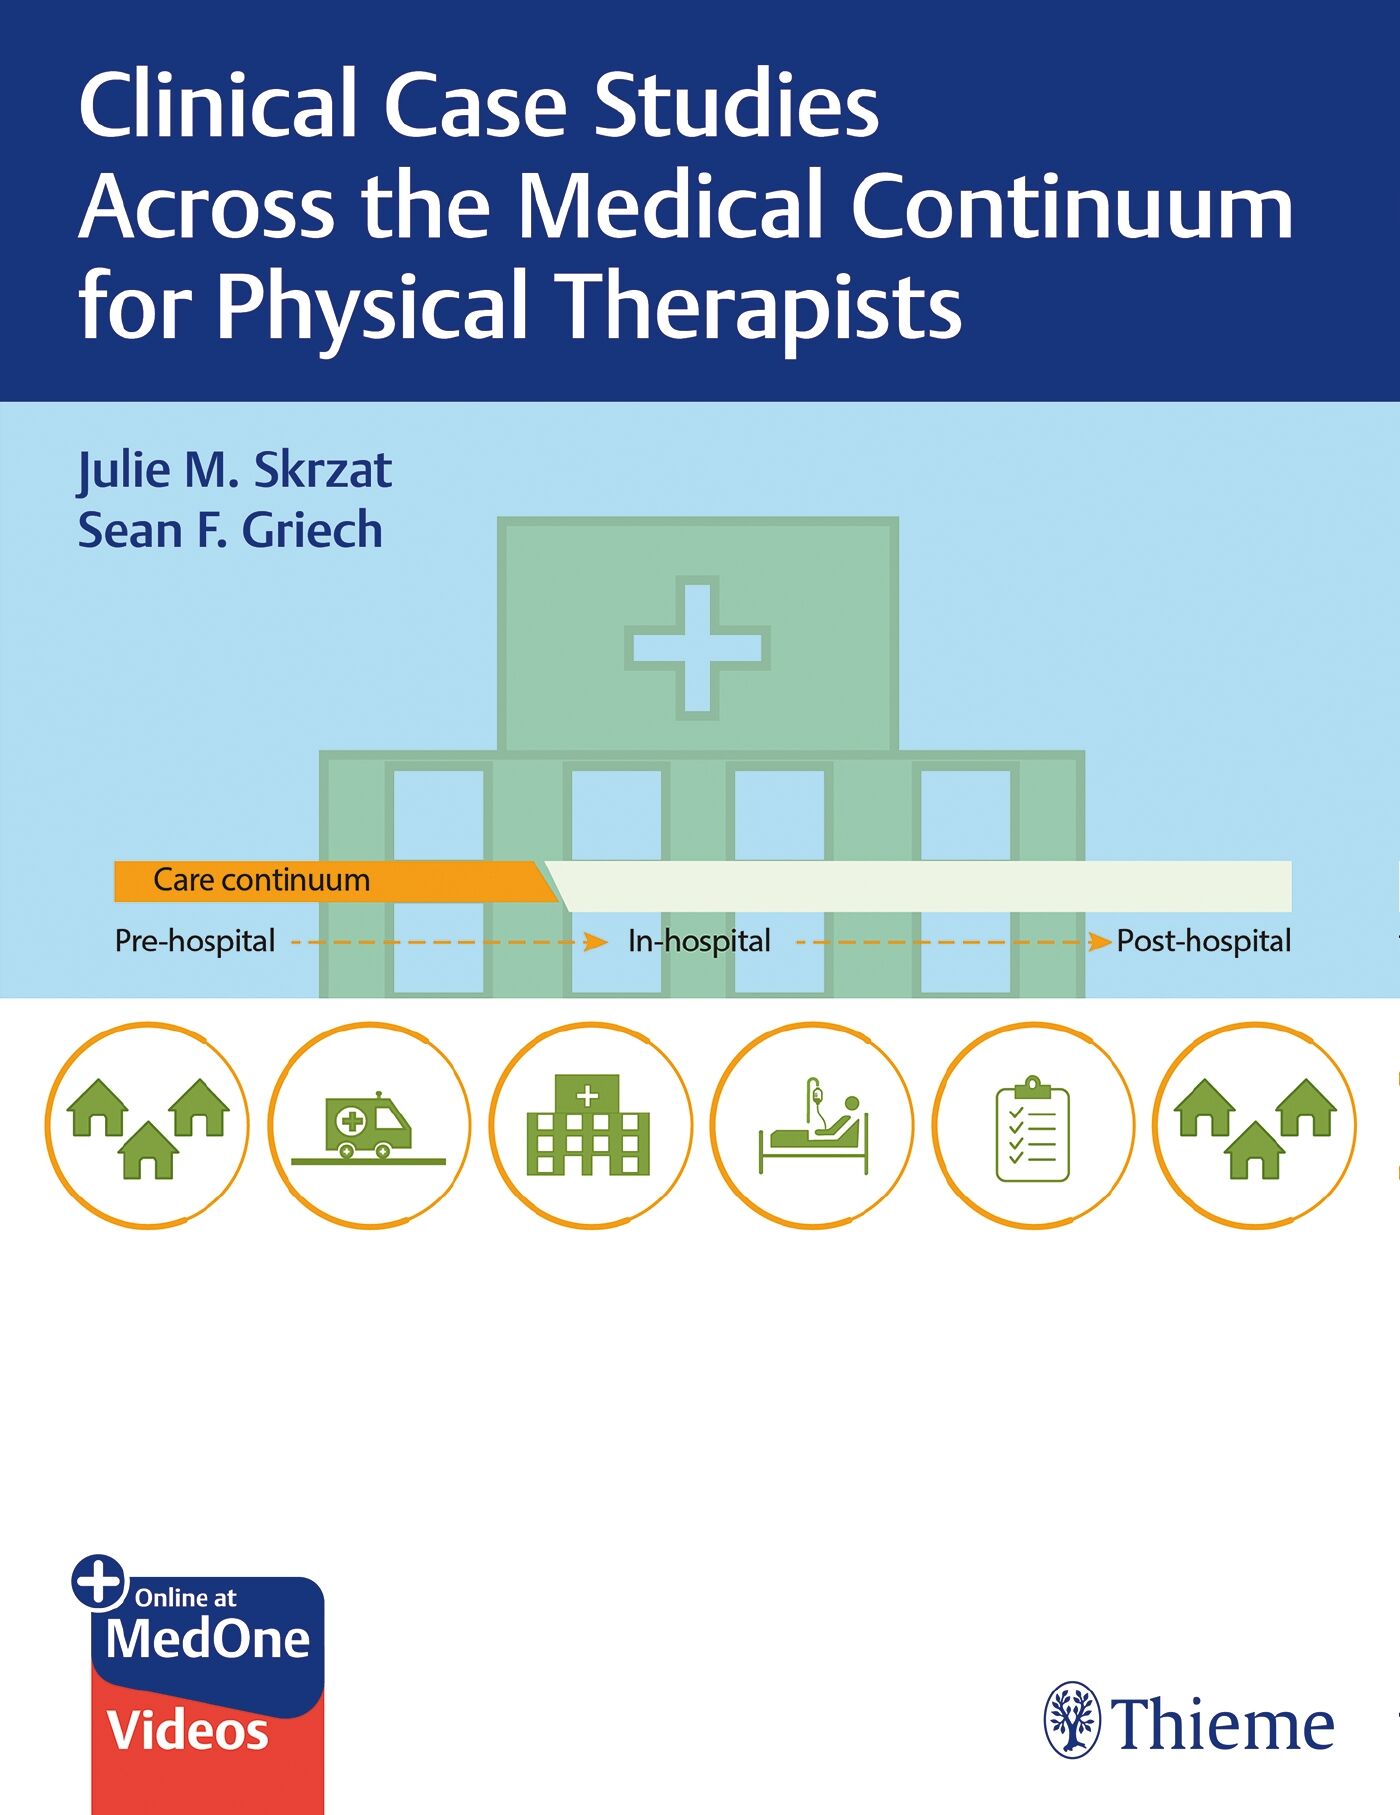 Clinical Case Studies Across the Medical Continuum for Physical Therapists, 9781684201877